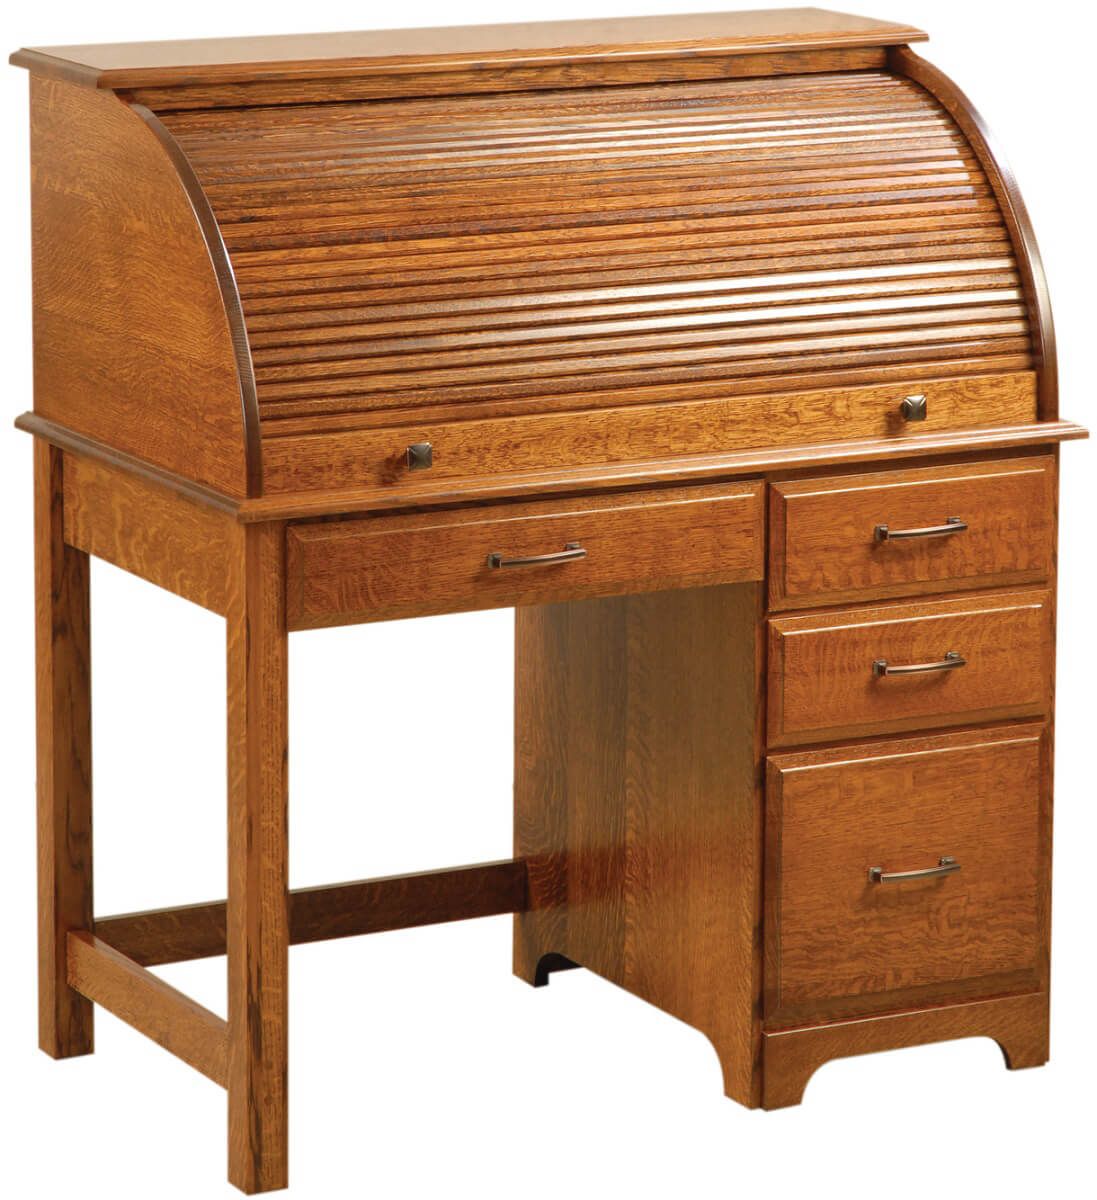 Roll Top Desk Countryside Amish Furniture, Oak Roll Top Desk Small